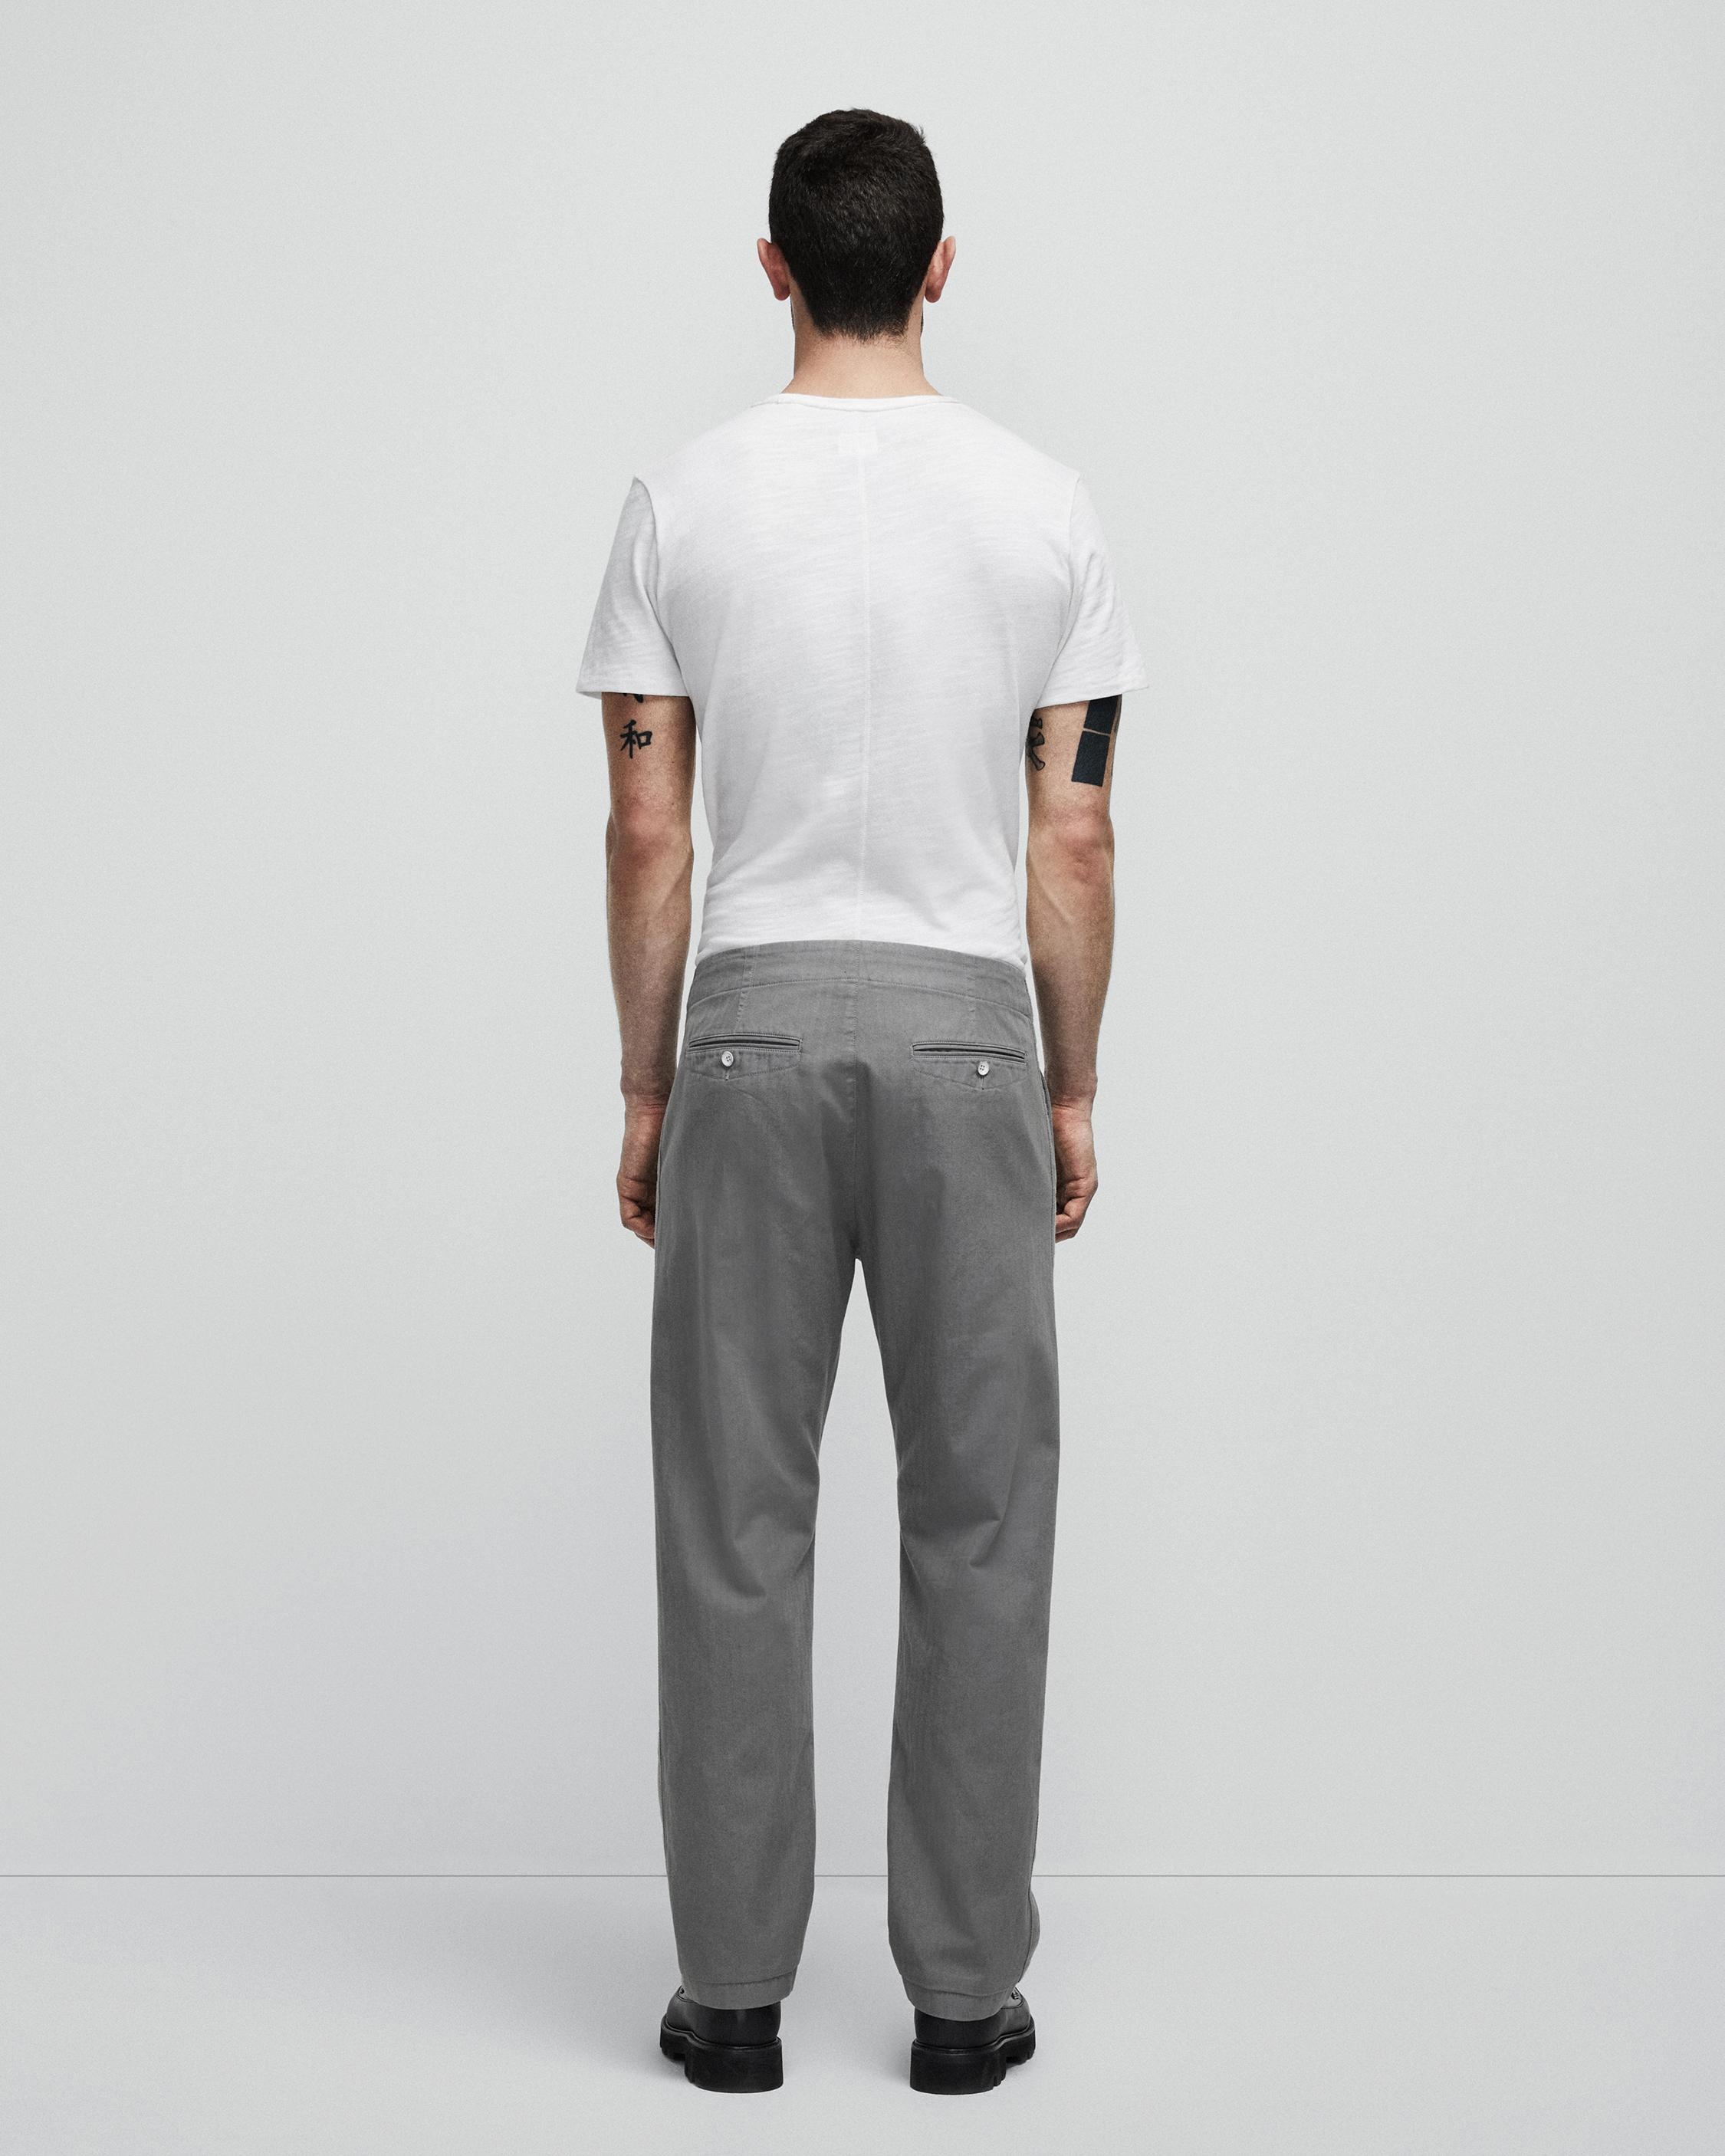 Brighton Cotton Linen Trouser
Relaxed Fit Pant - 6